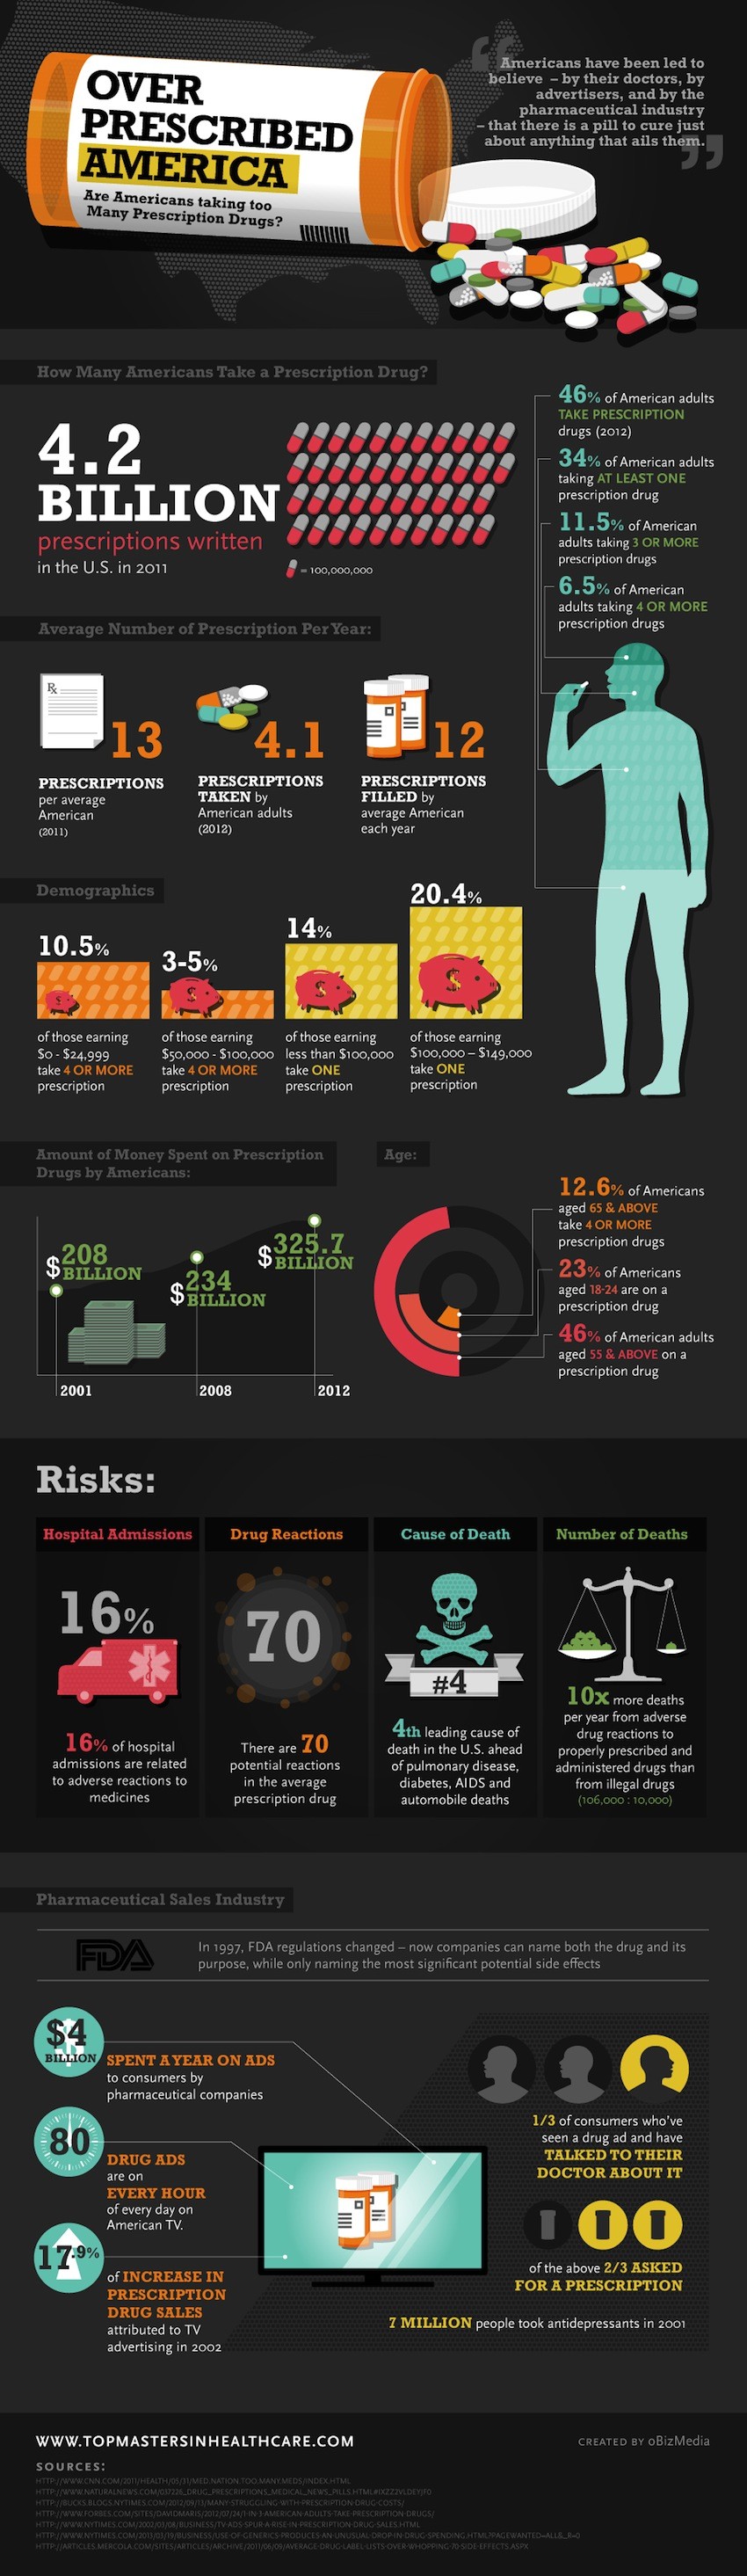 Do Americans Take Too Many Drugs? Infographic